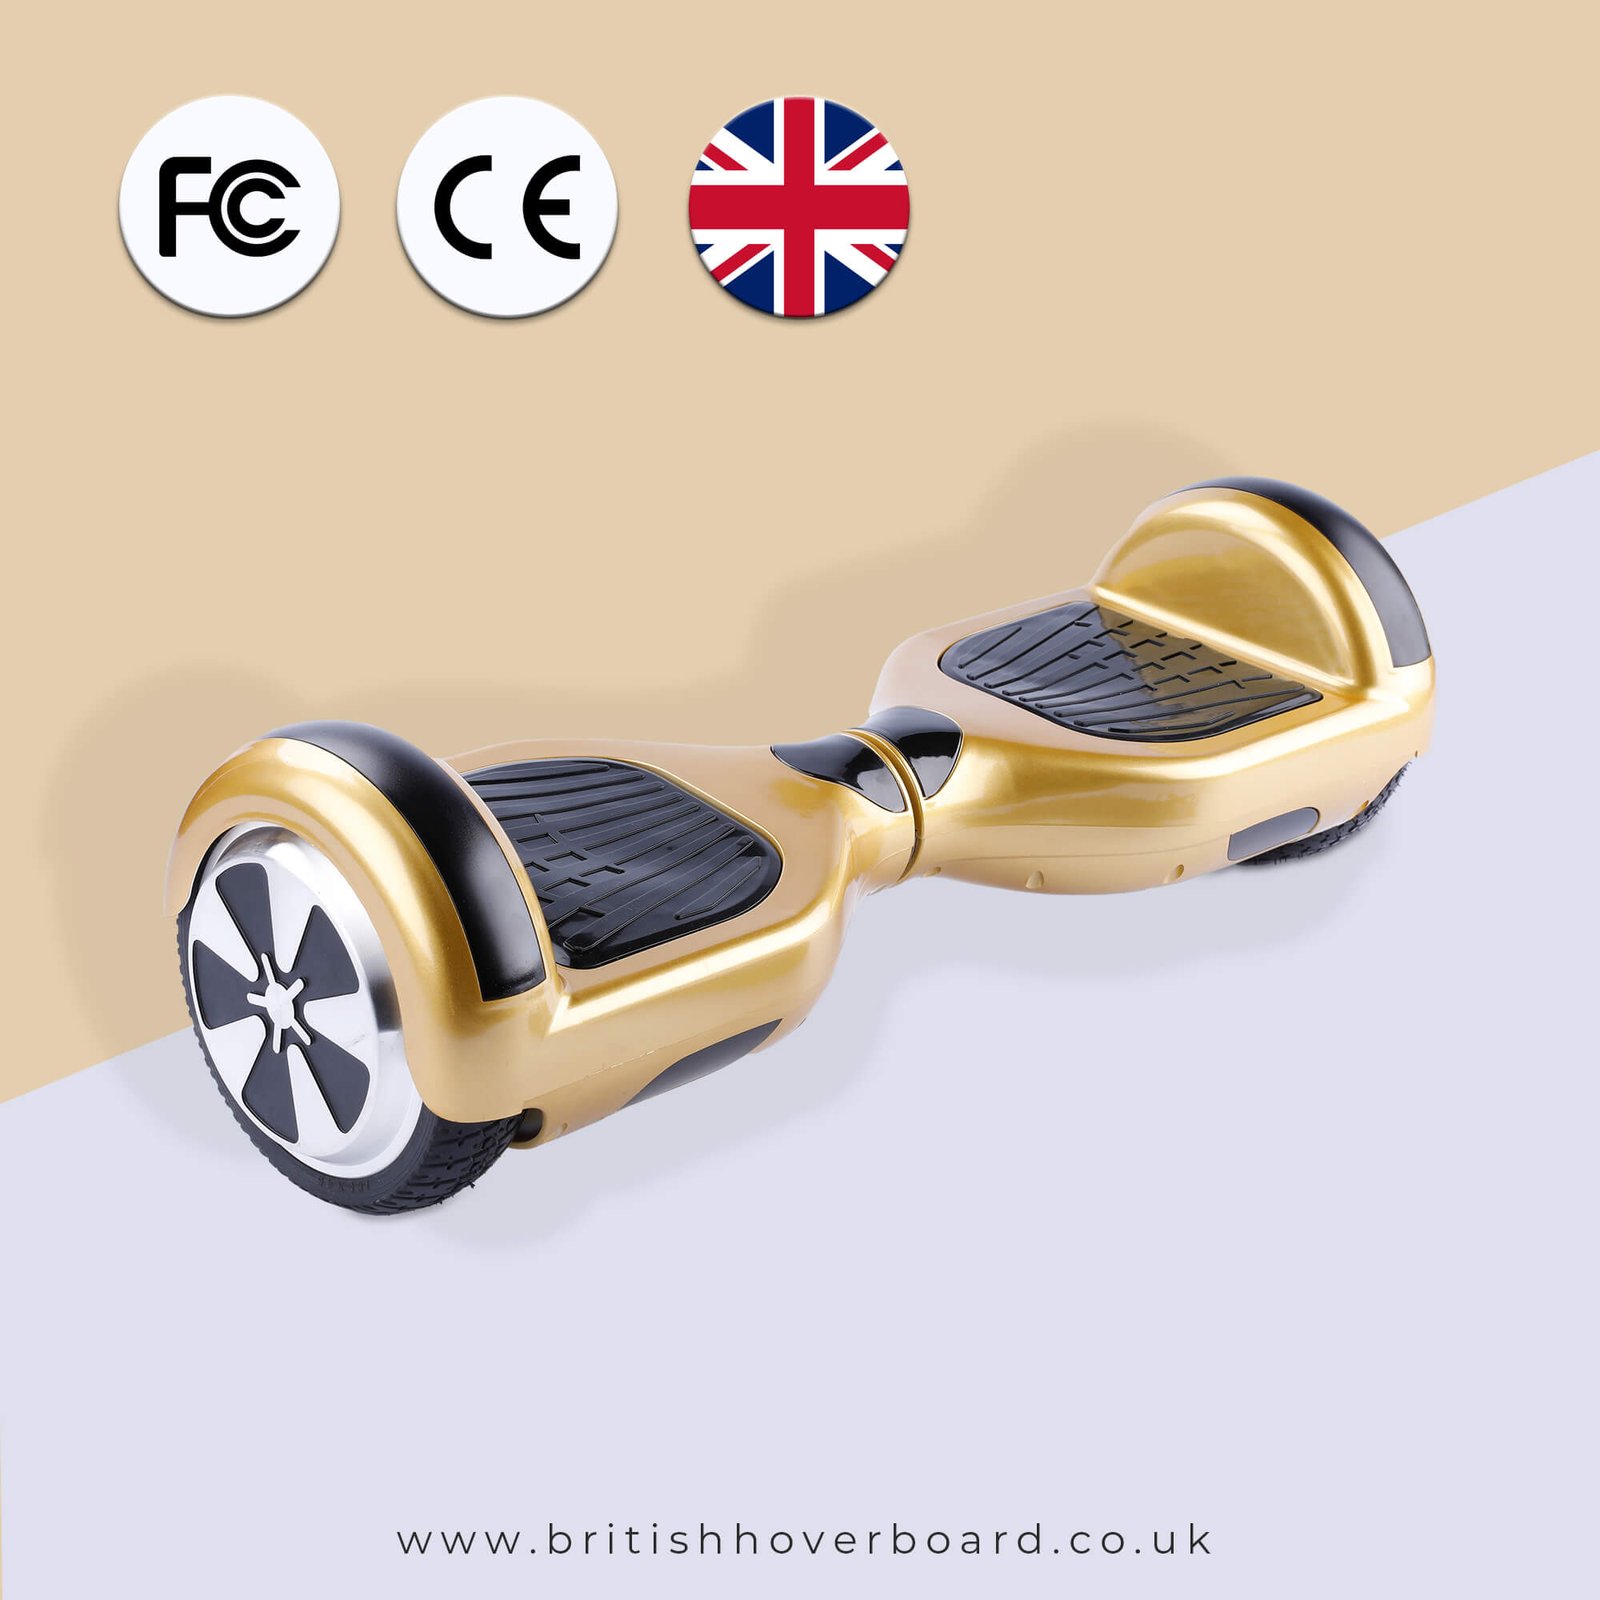 6.5" Hoverboard